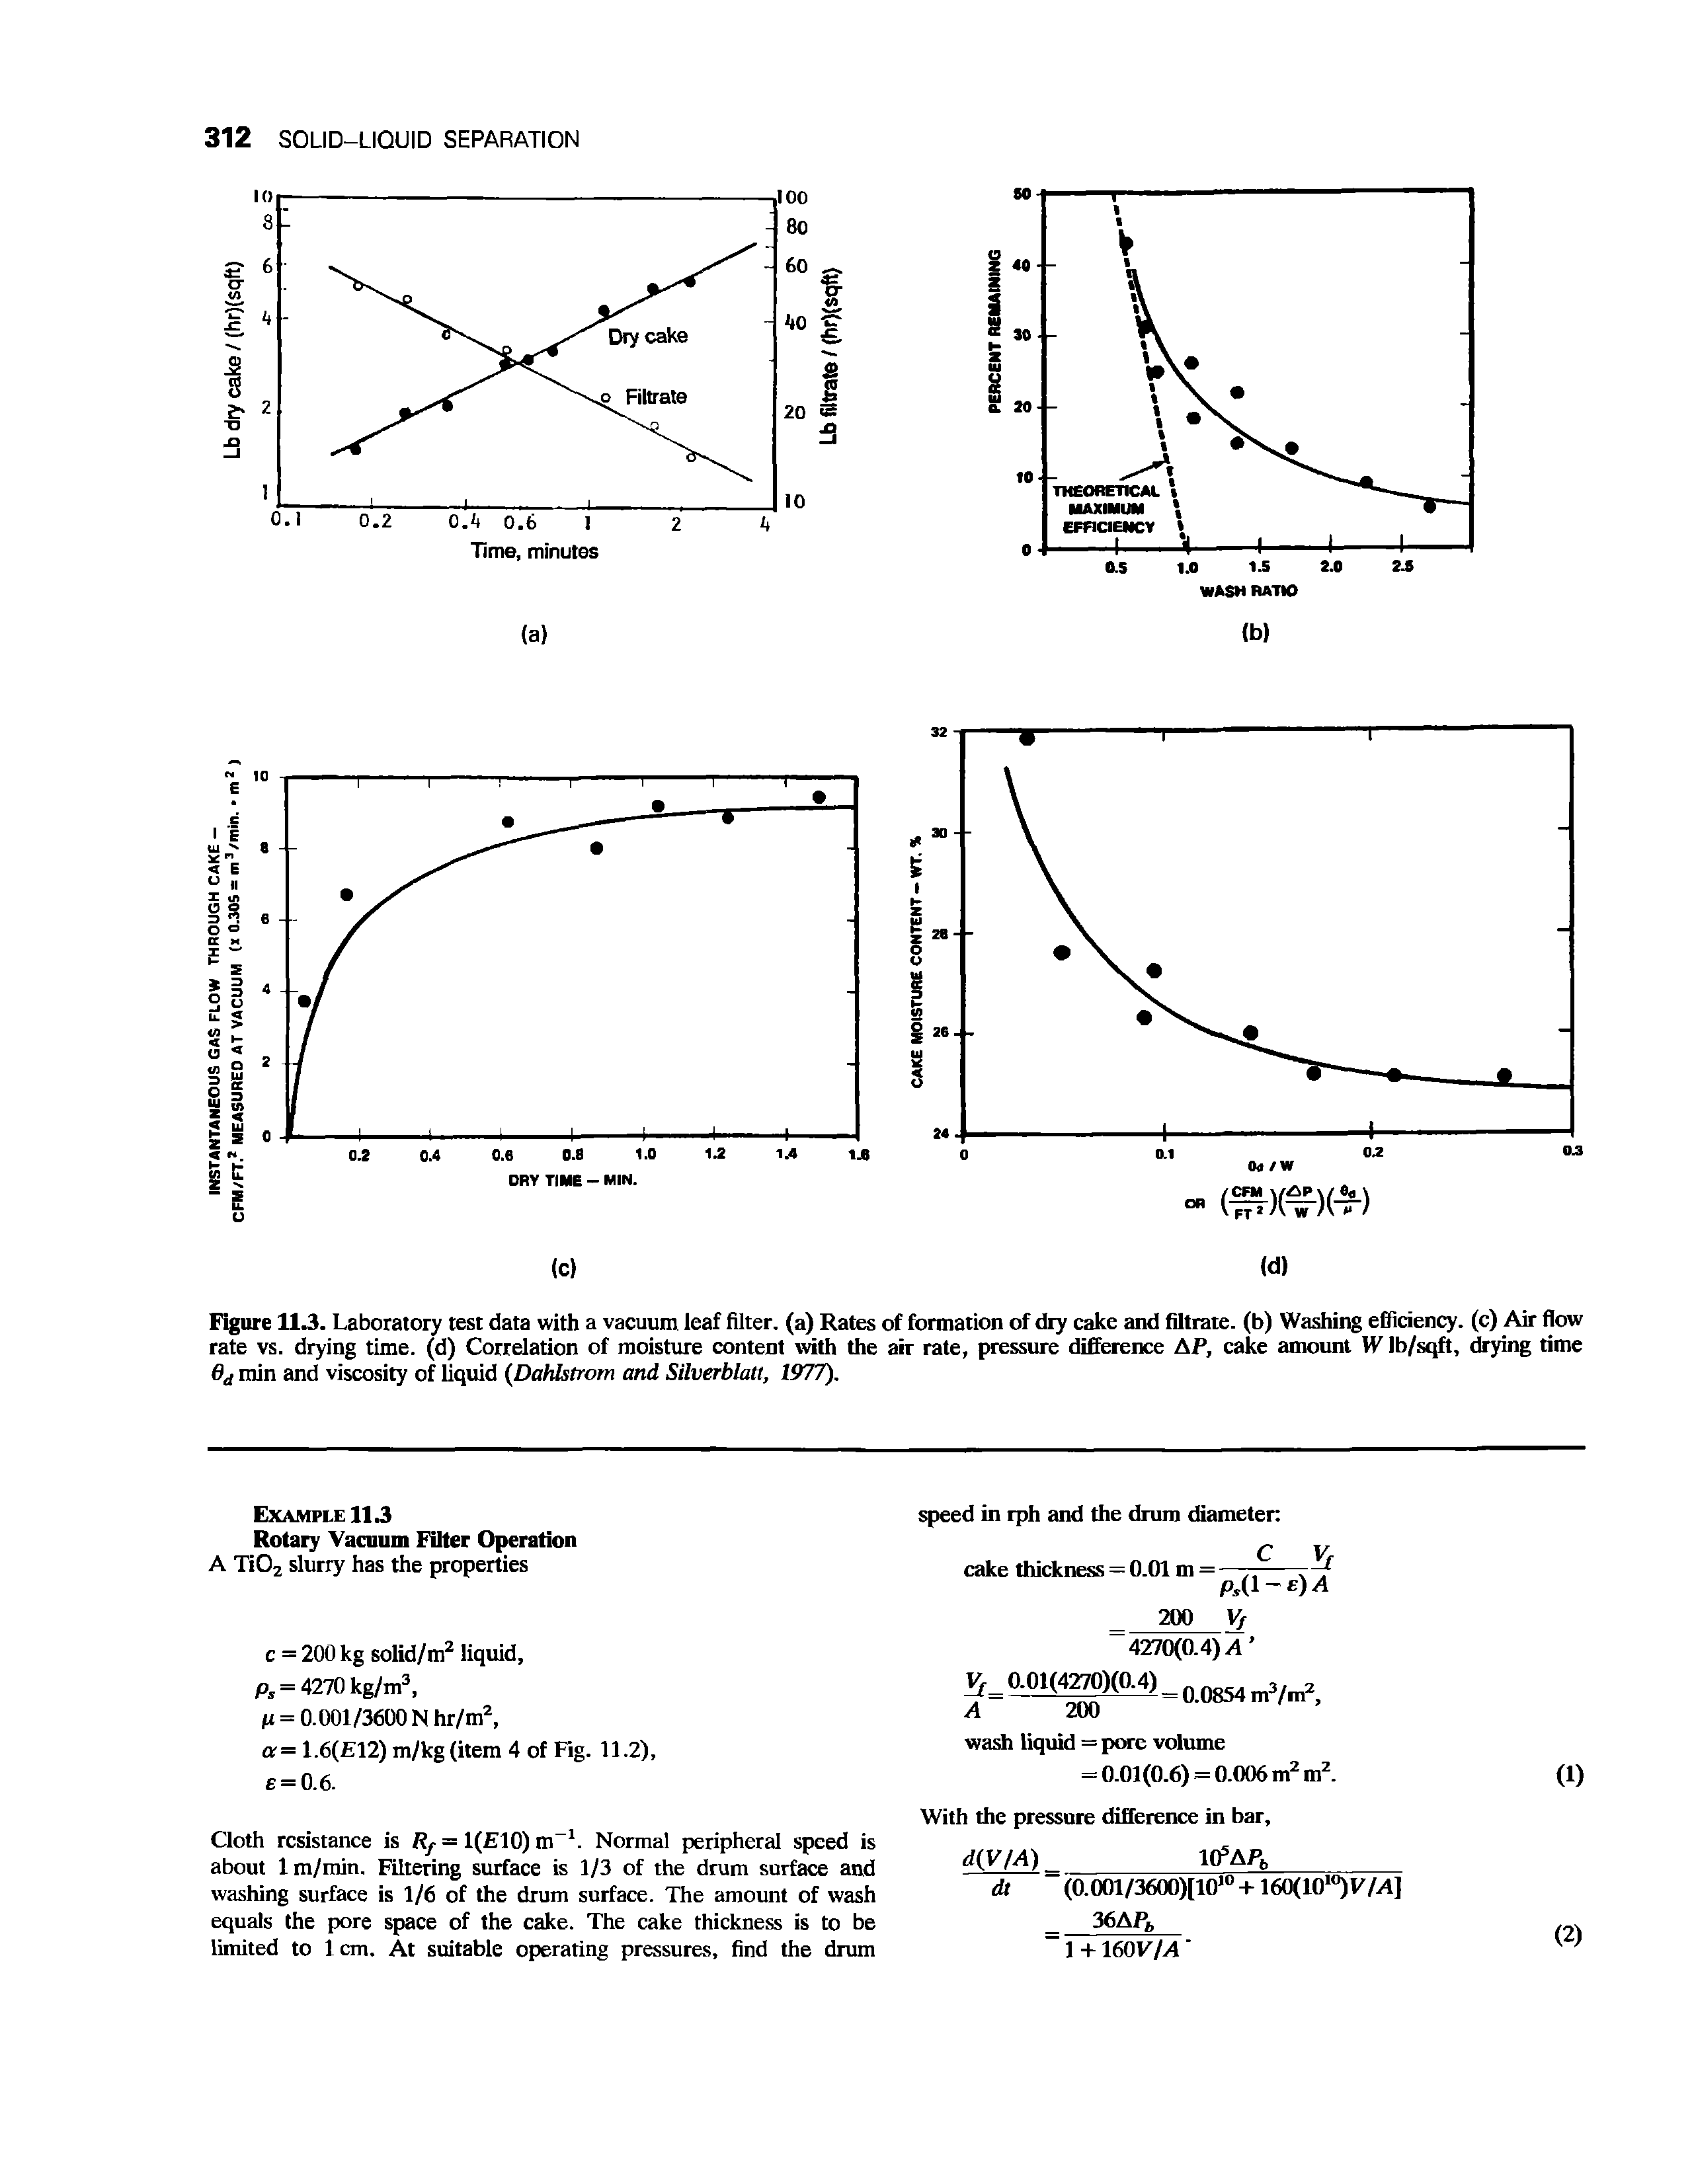 Figure 11.3. Laboratory test data with a vacuum leaf filter, (a) Rates of formation of dry cake and filtrate, (b) Washing efficiency, (c) Air flow rate vs. drying time, (d) Correlation of moisture content with the air rate, pressure difference AP, cake amount W Ib/sqft, drying time 6d min and viscosity of liquid Dahlstrom and Silverblatt, 1977).